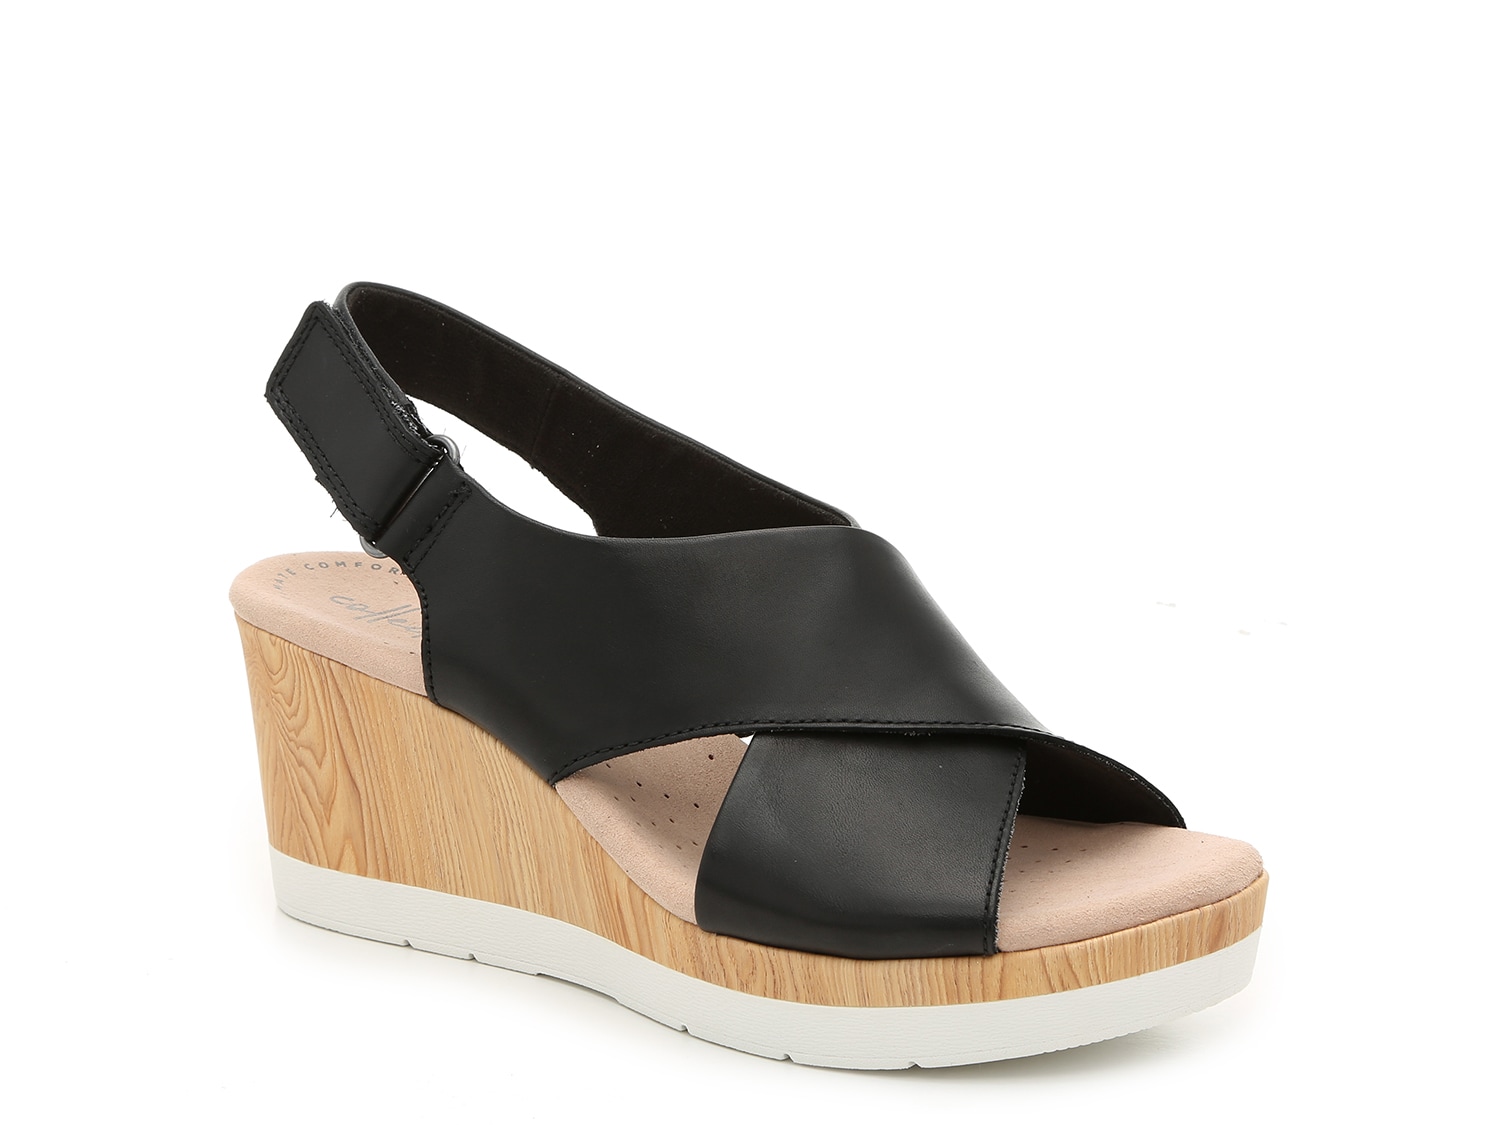 clarks wedges on sale 